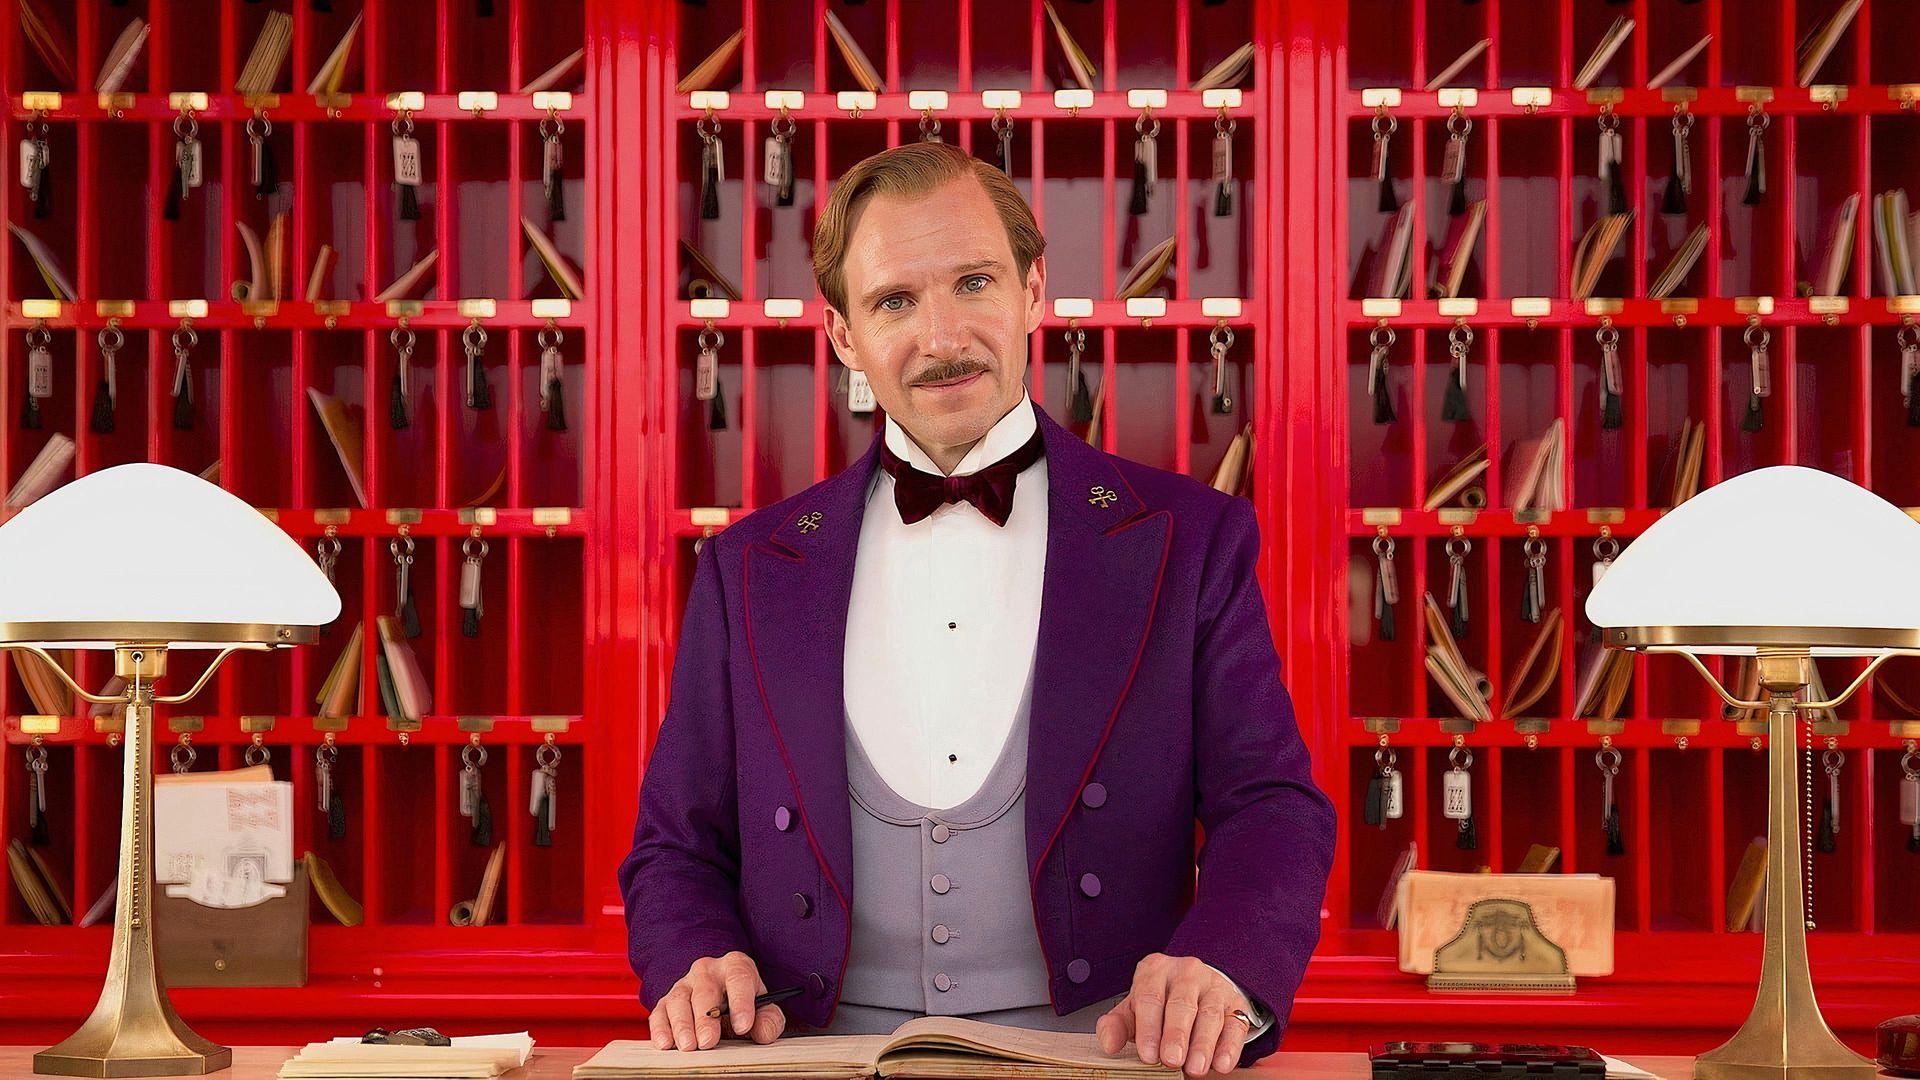 The Grand Budapest Hotel Backdrop